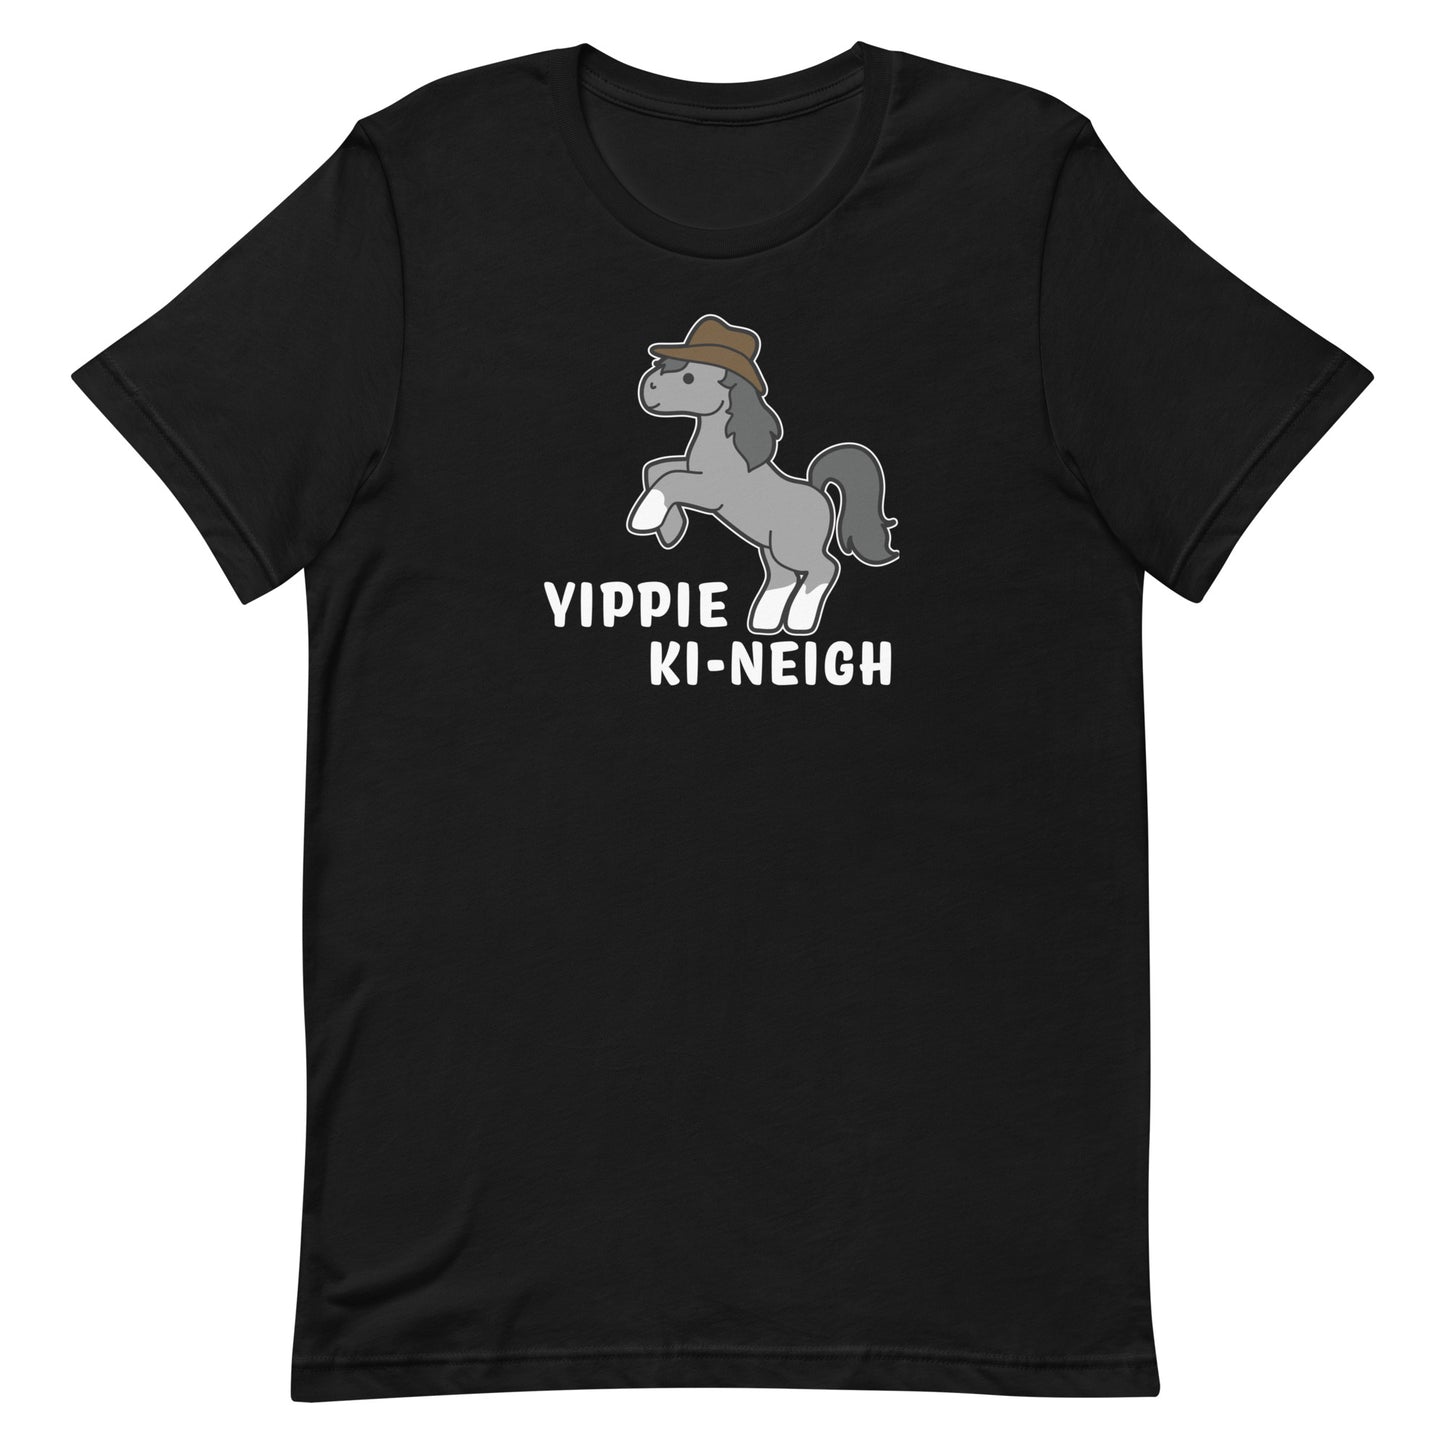 A black crewneck t-shirt featuring an illustration of a smiling grey pony rearing and wearing a cowboy hat. Text underneath the pony reads "Yippie Ki-Neigh"